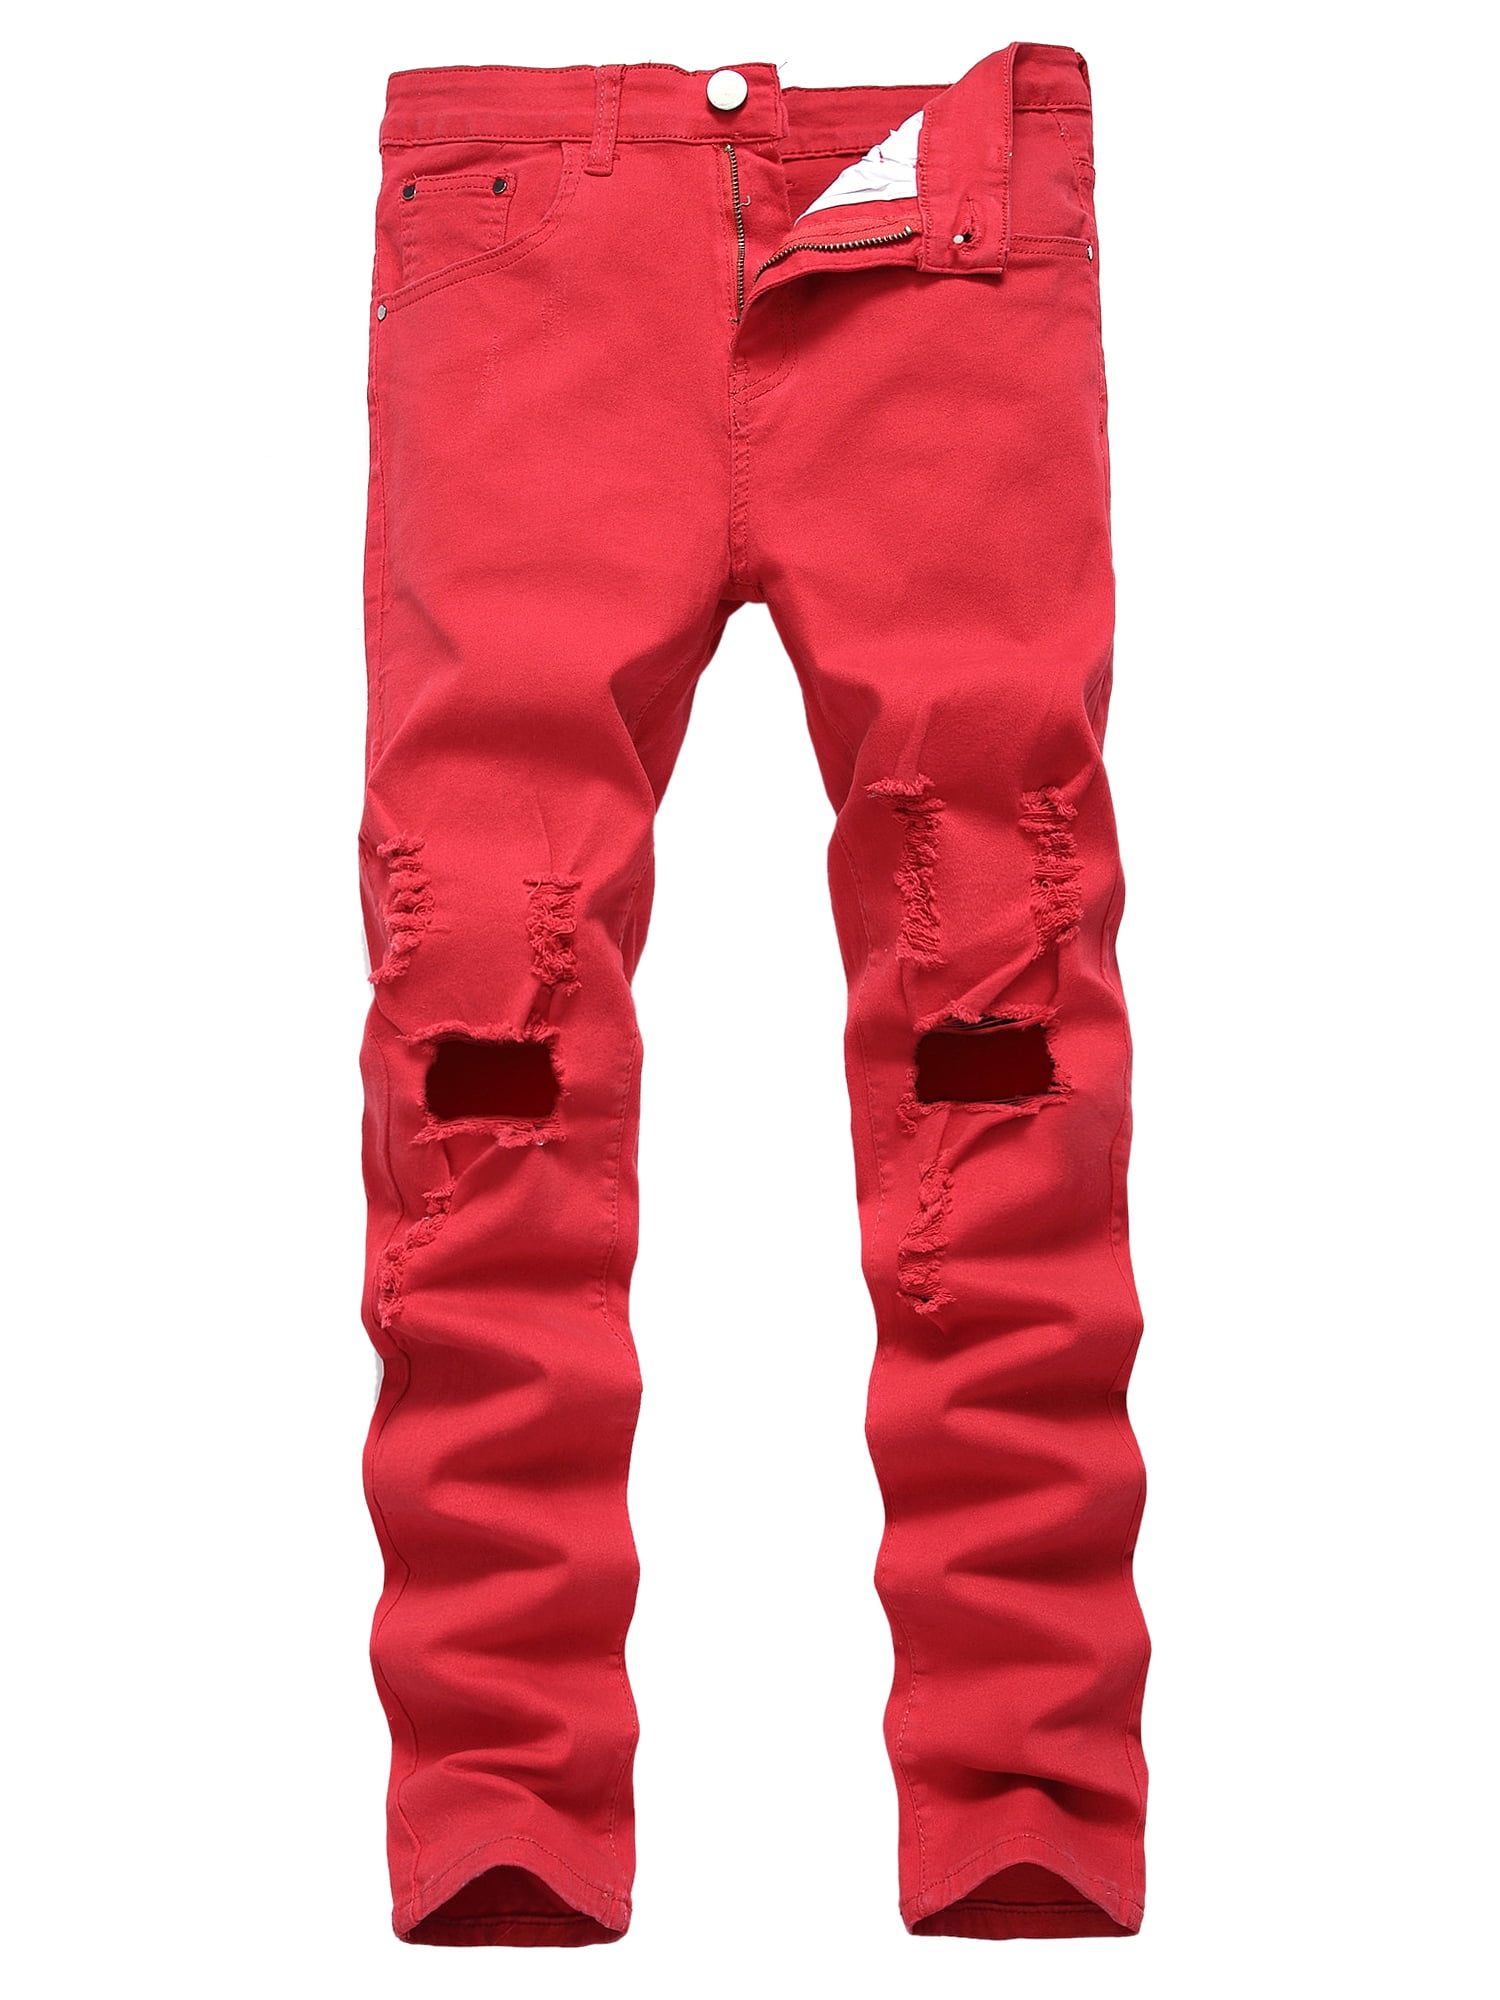 jeans red colour